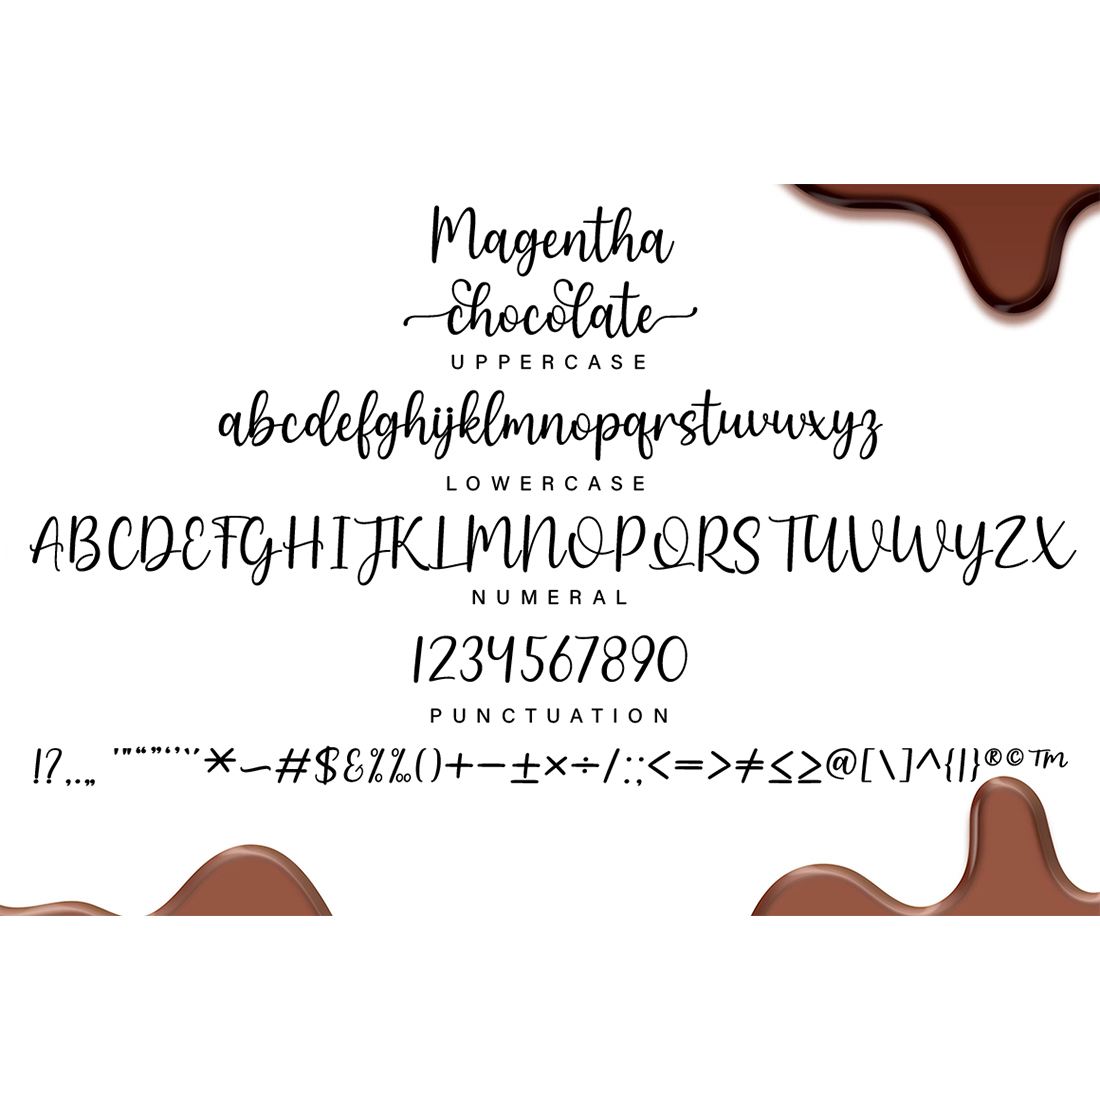 Font that has chocolate on it.